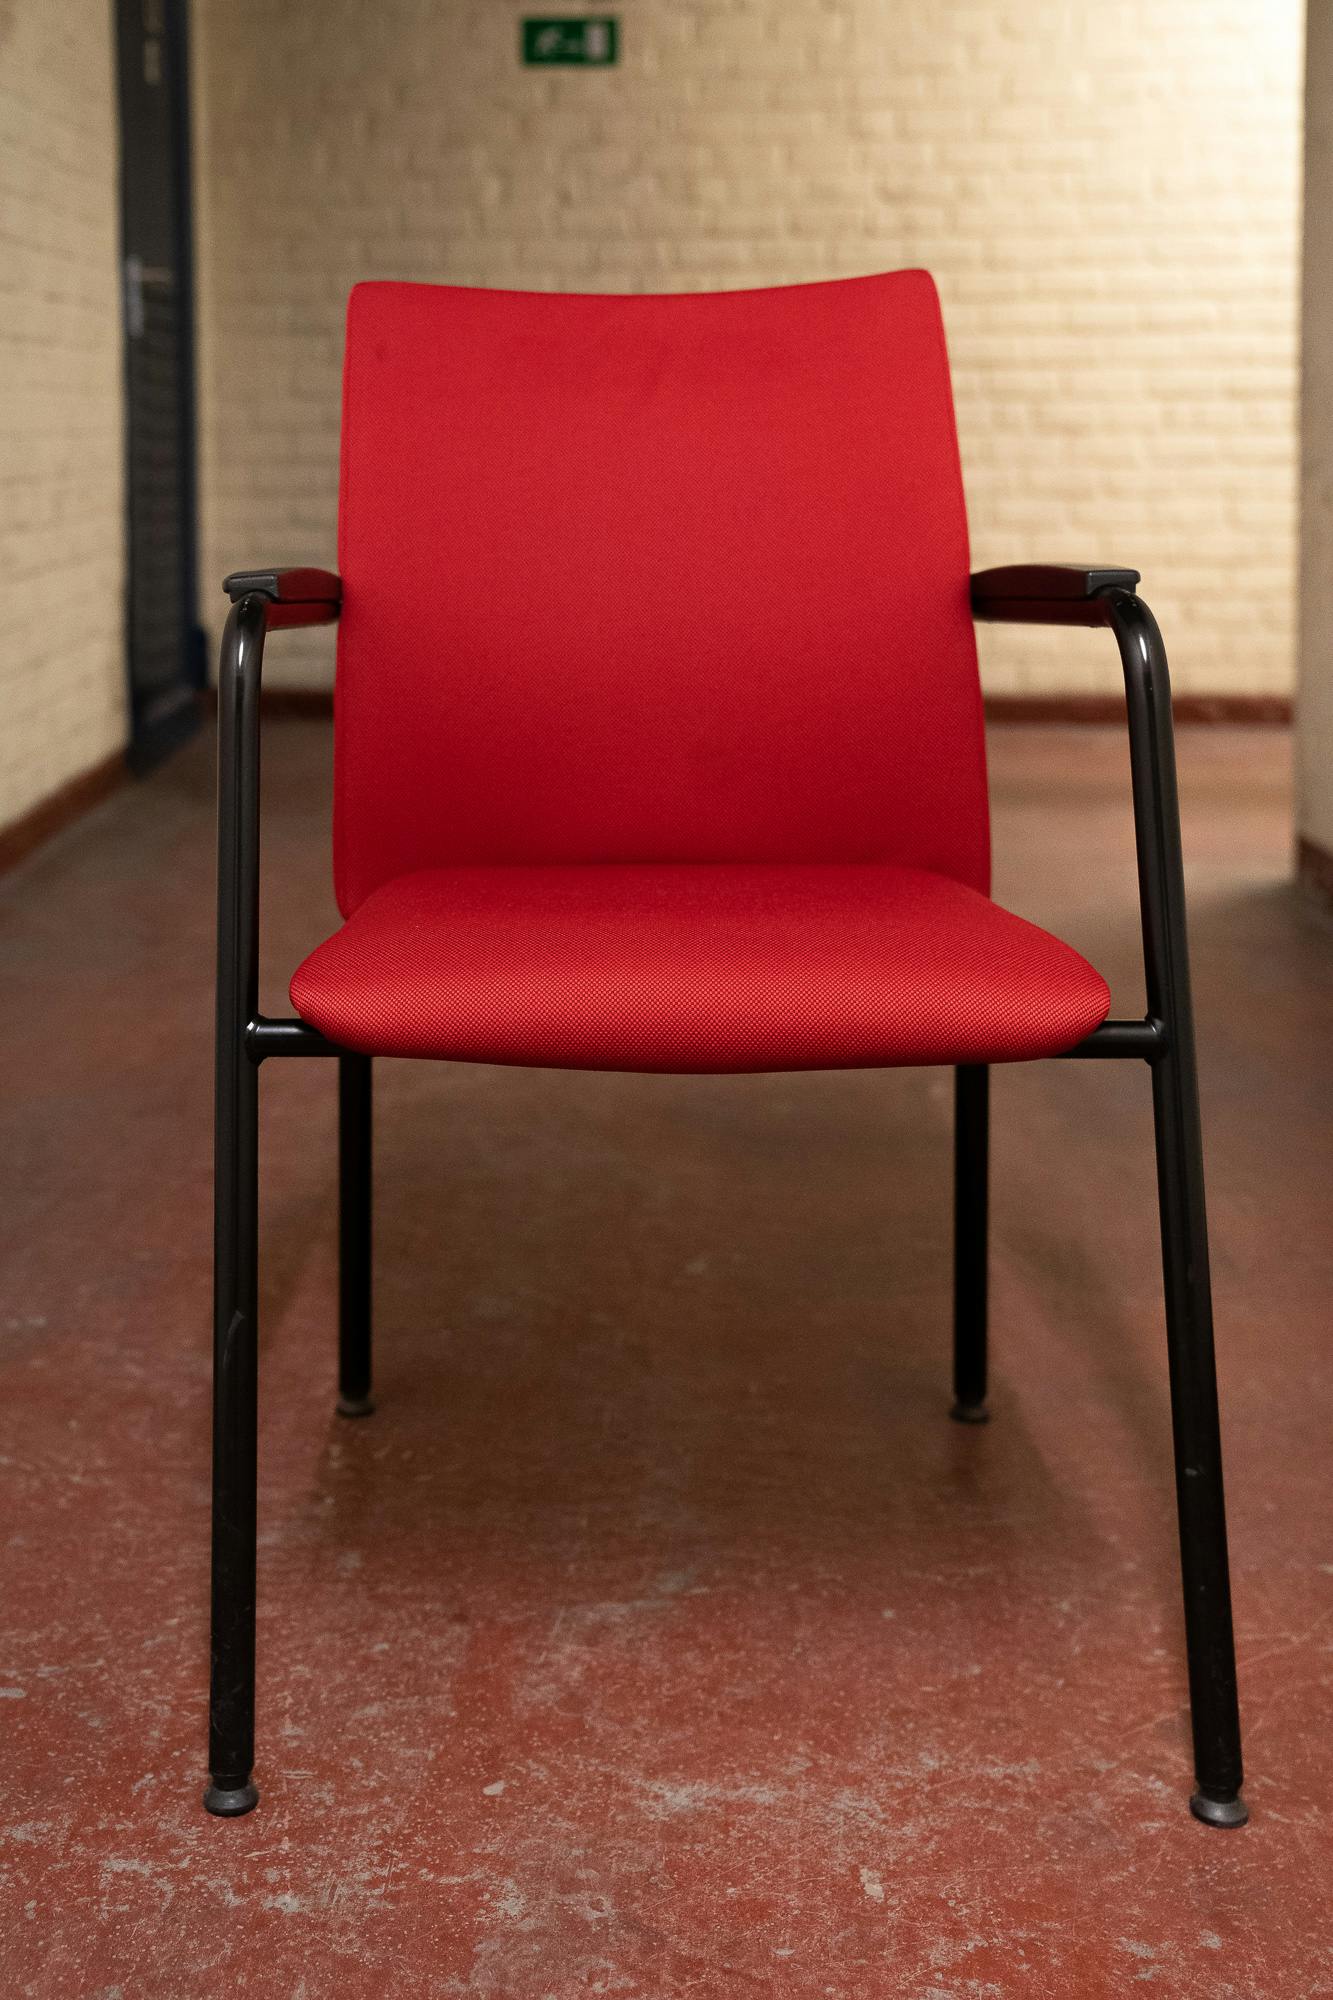 Red stacking chairs - Second hand quality "Chairs" - Relieve Furniture